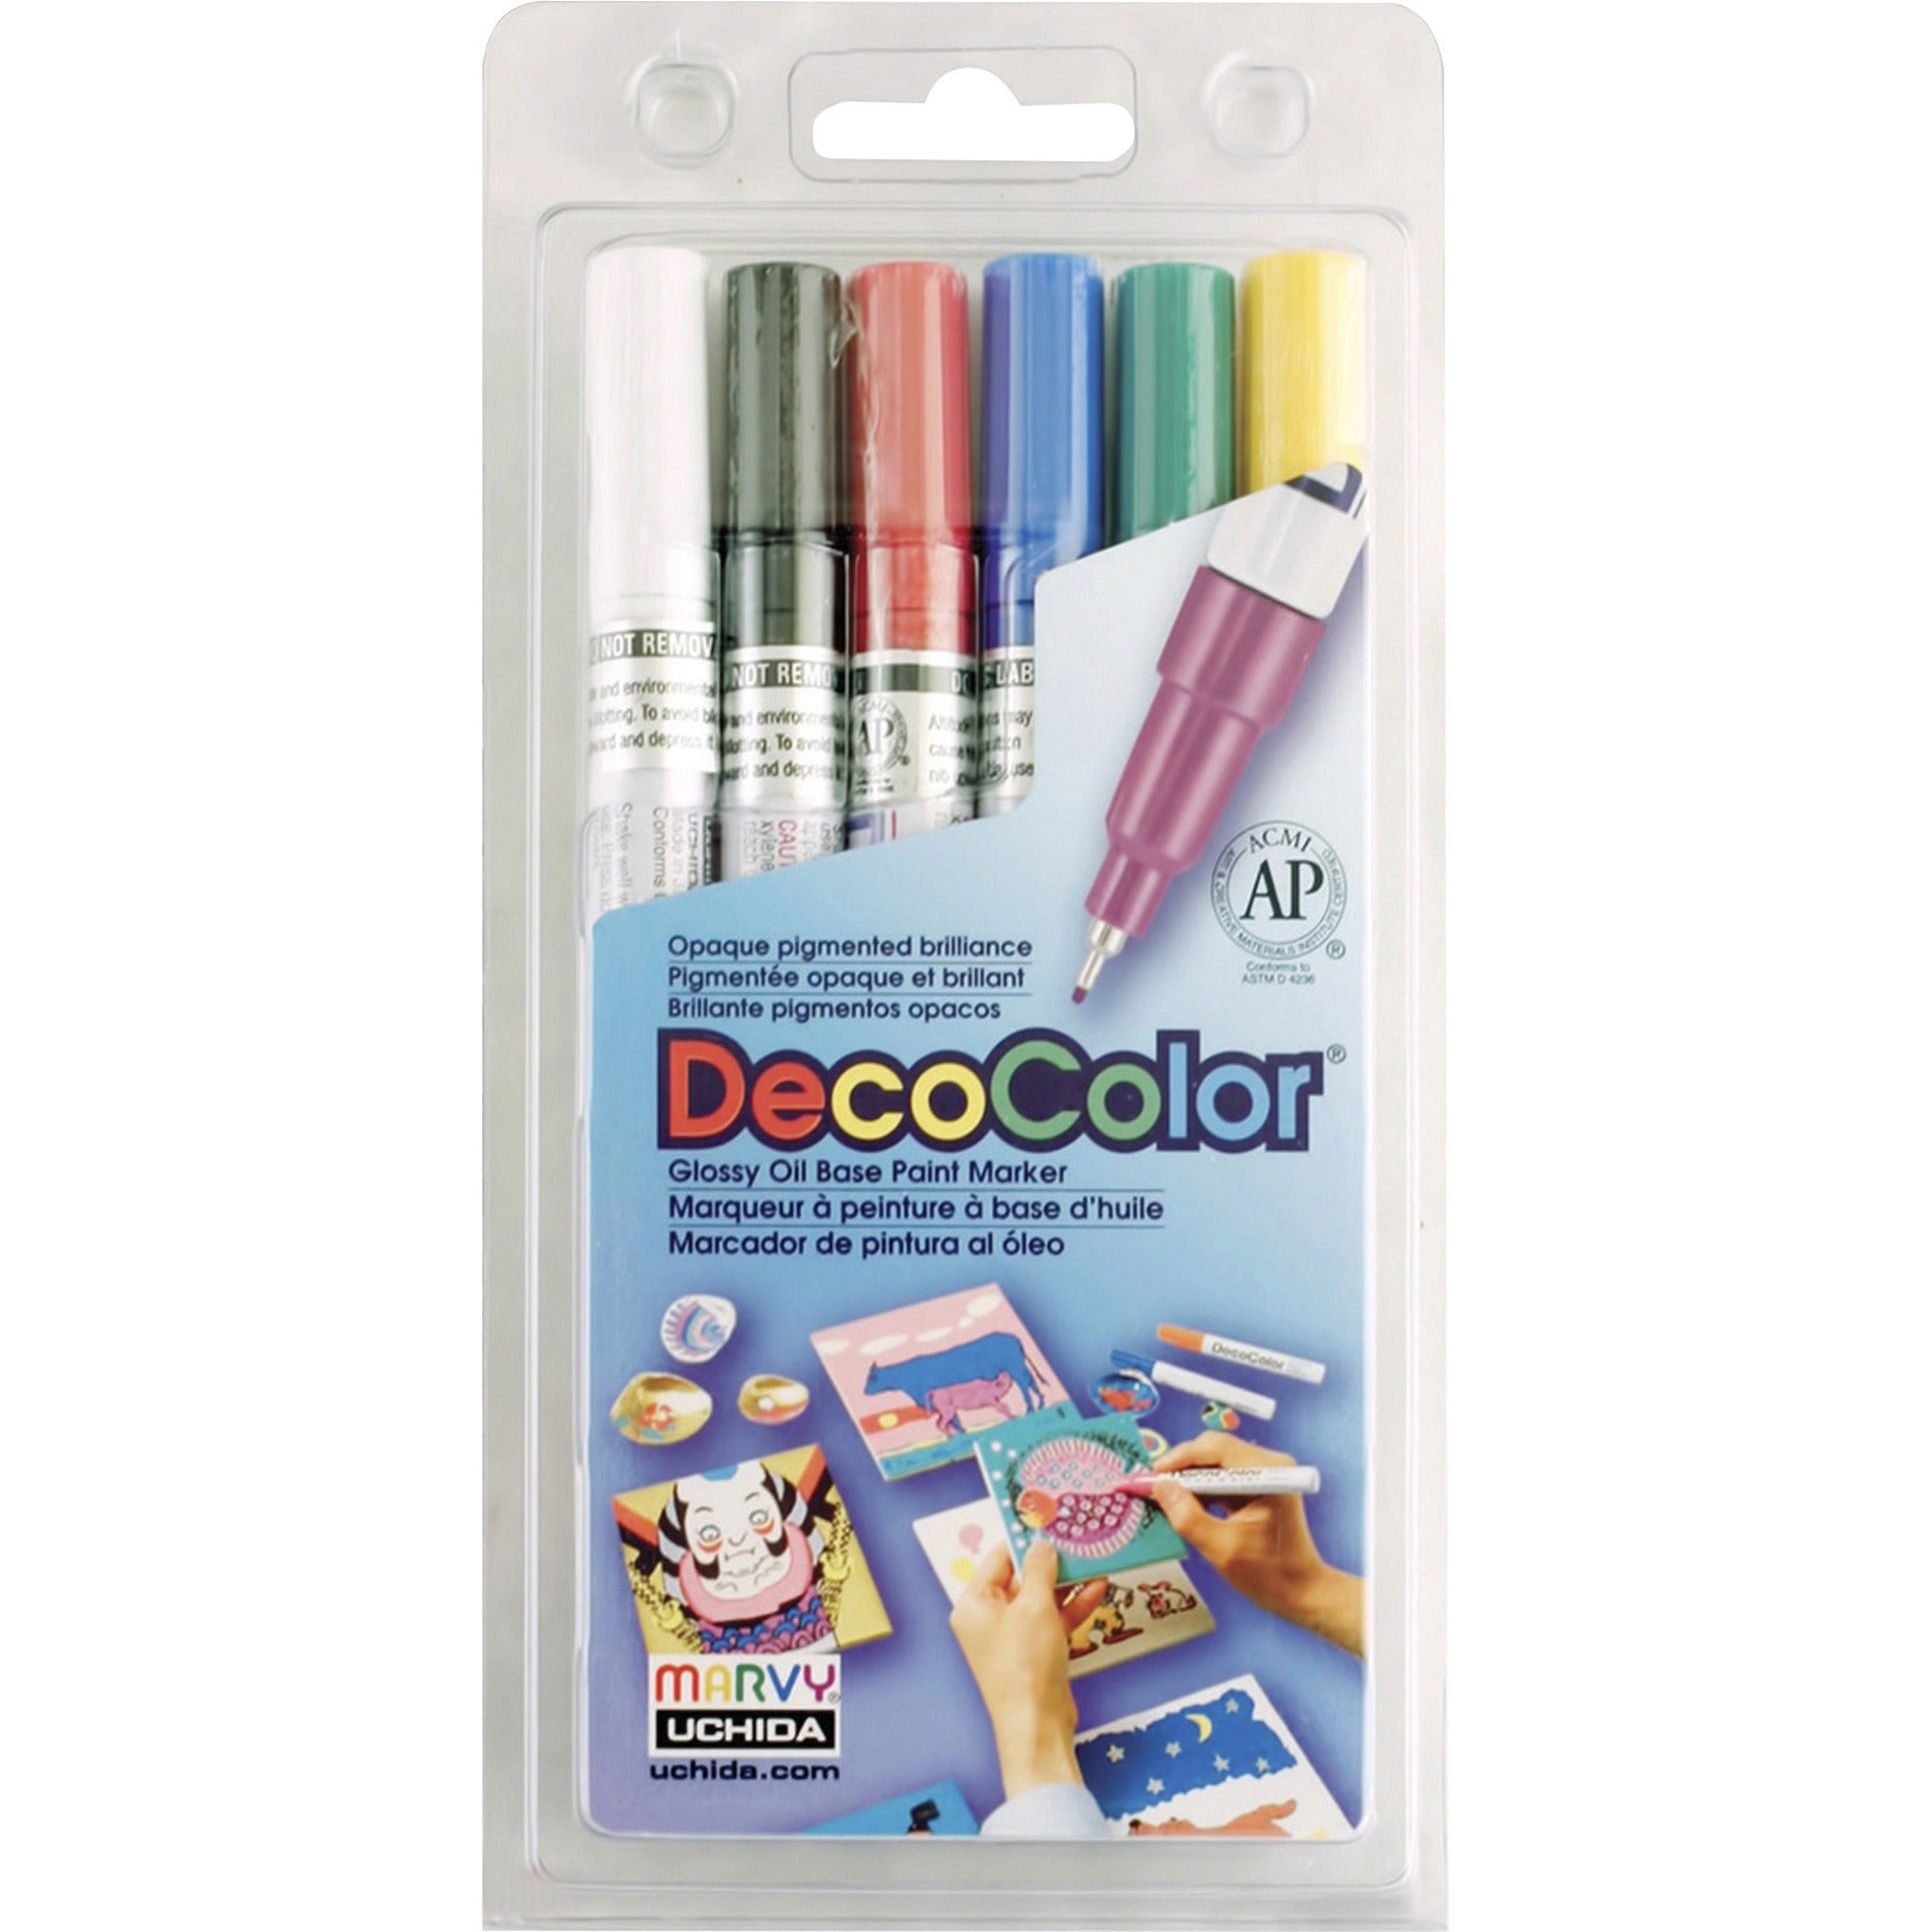 uchida-decocolor-opaque-paint-markers-extra-fine-marker-point-multi-oil-based-pigment-based-ink-6-set_uch12346a - 1